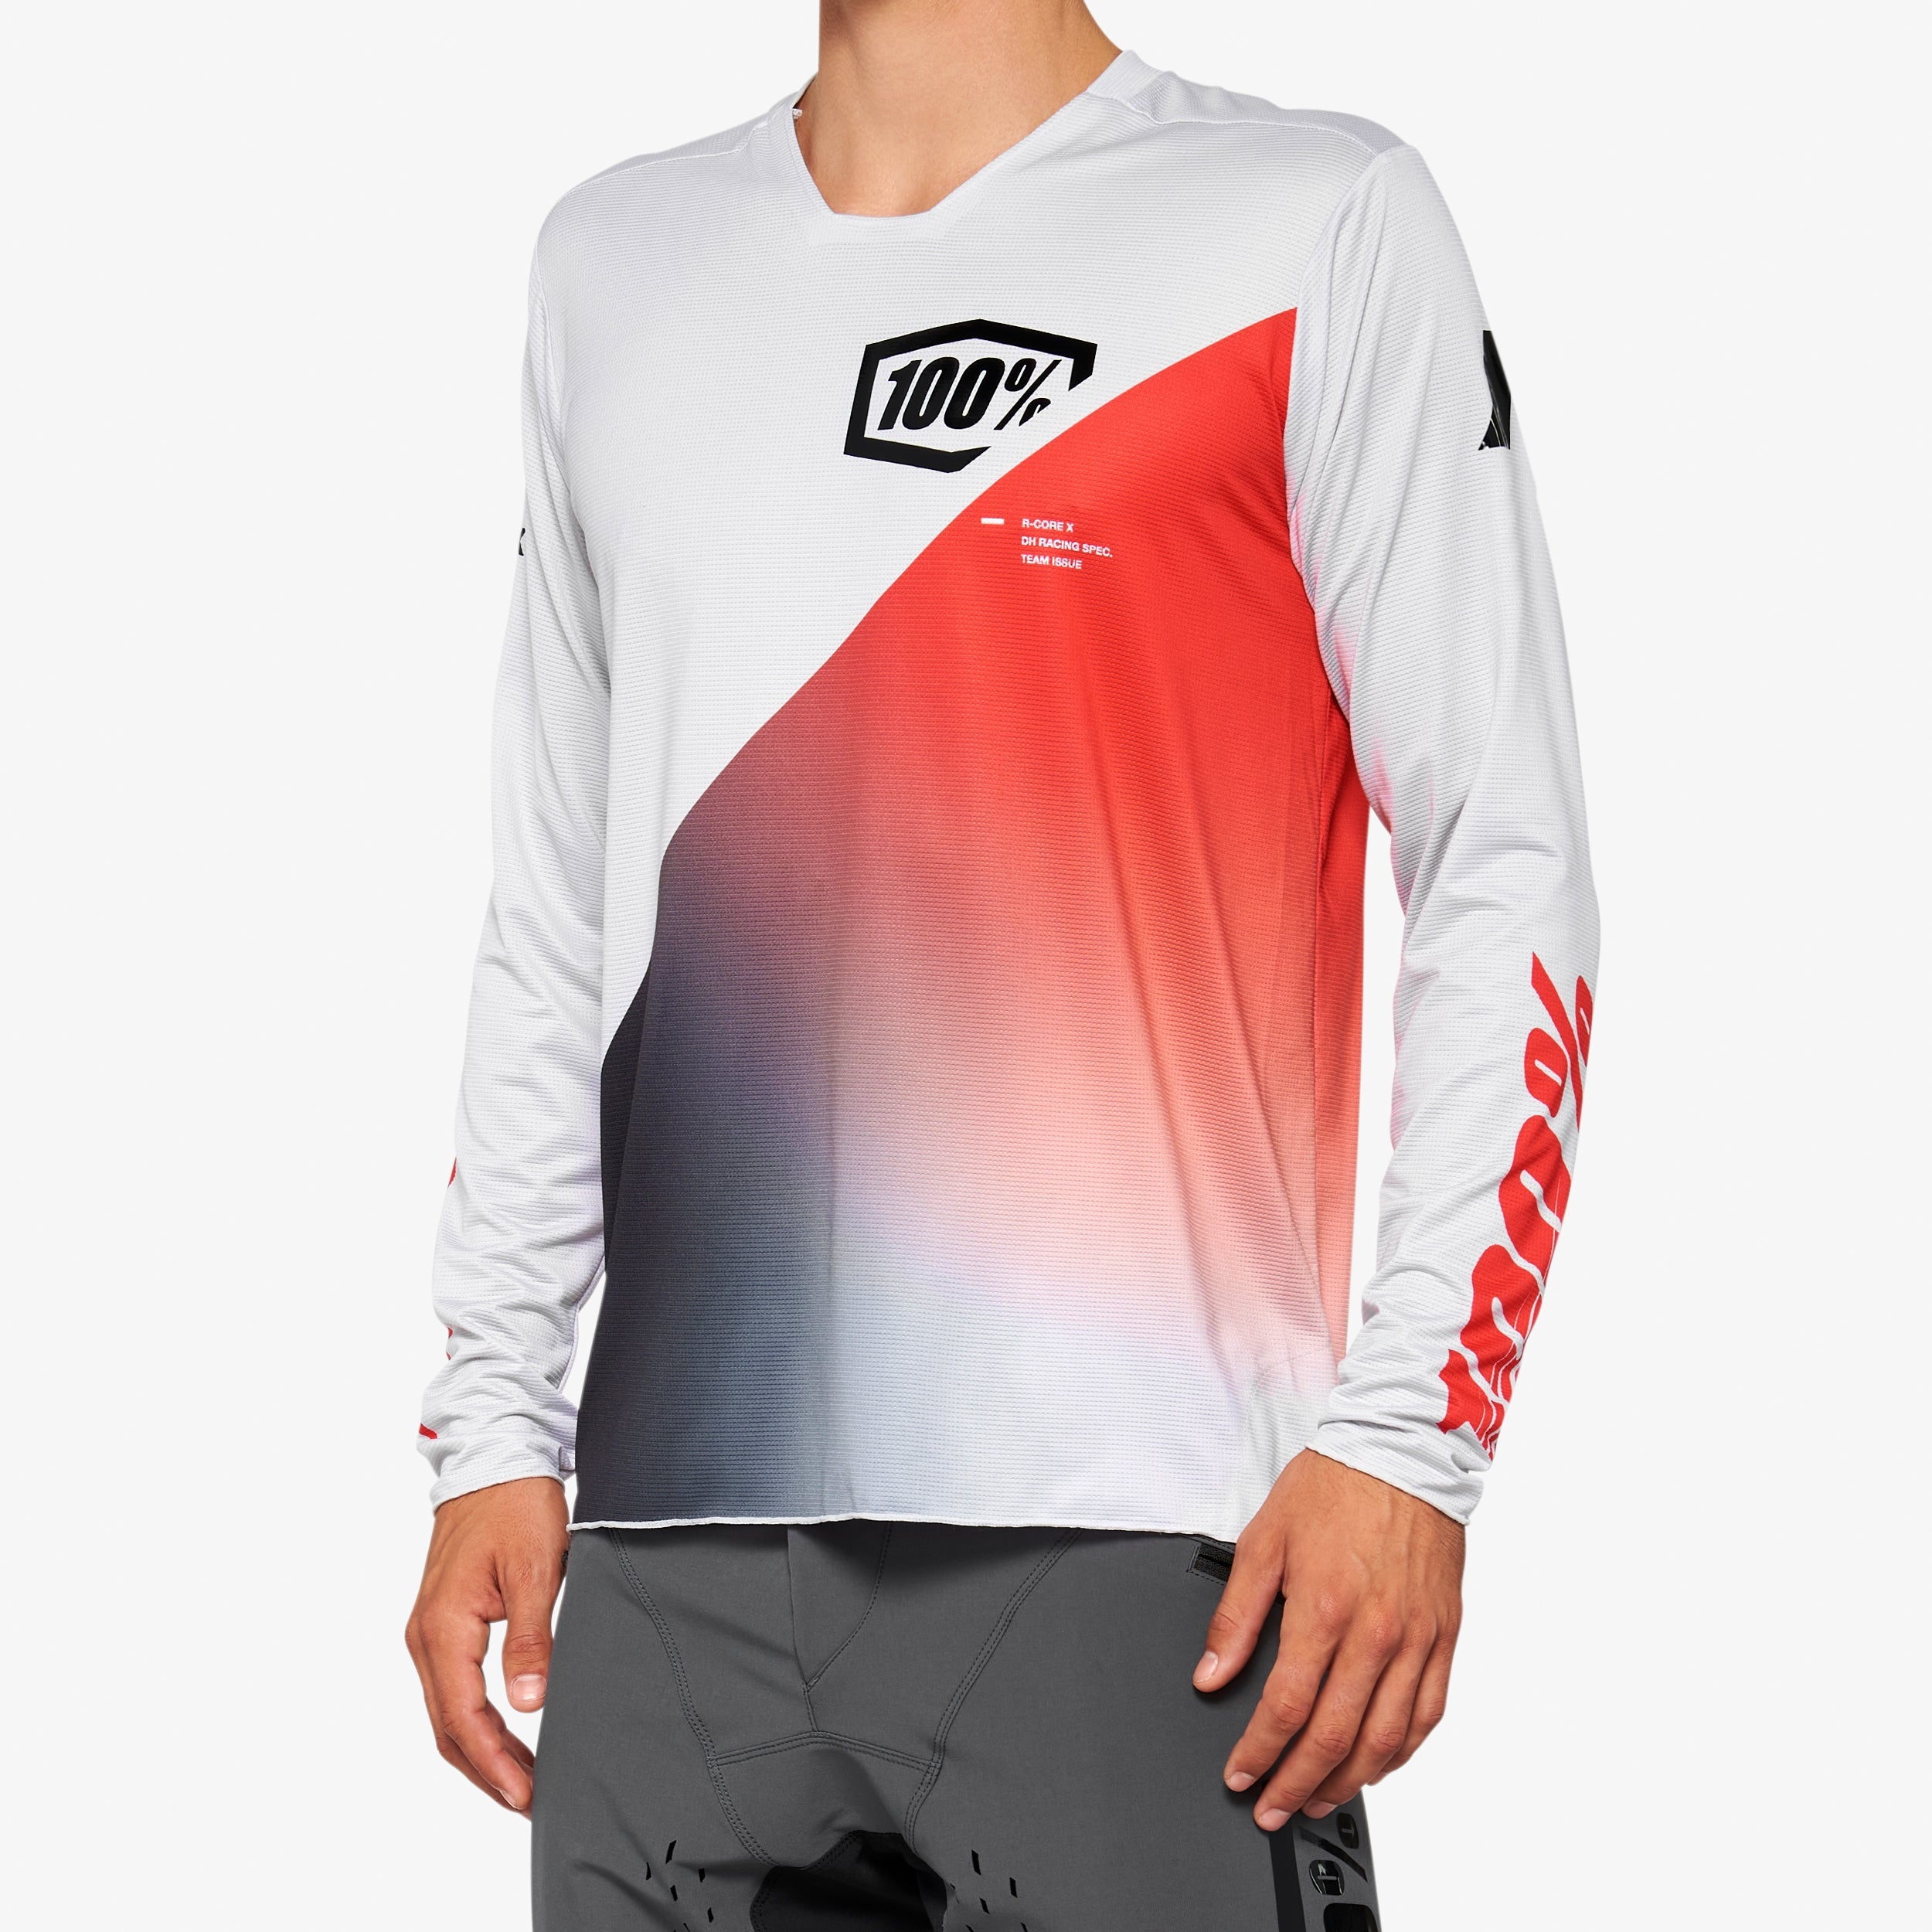 R-CORE-X Long Sleeve Jersey Grey/Racer Red